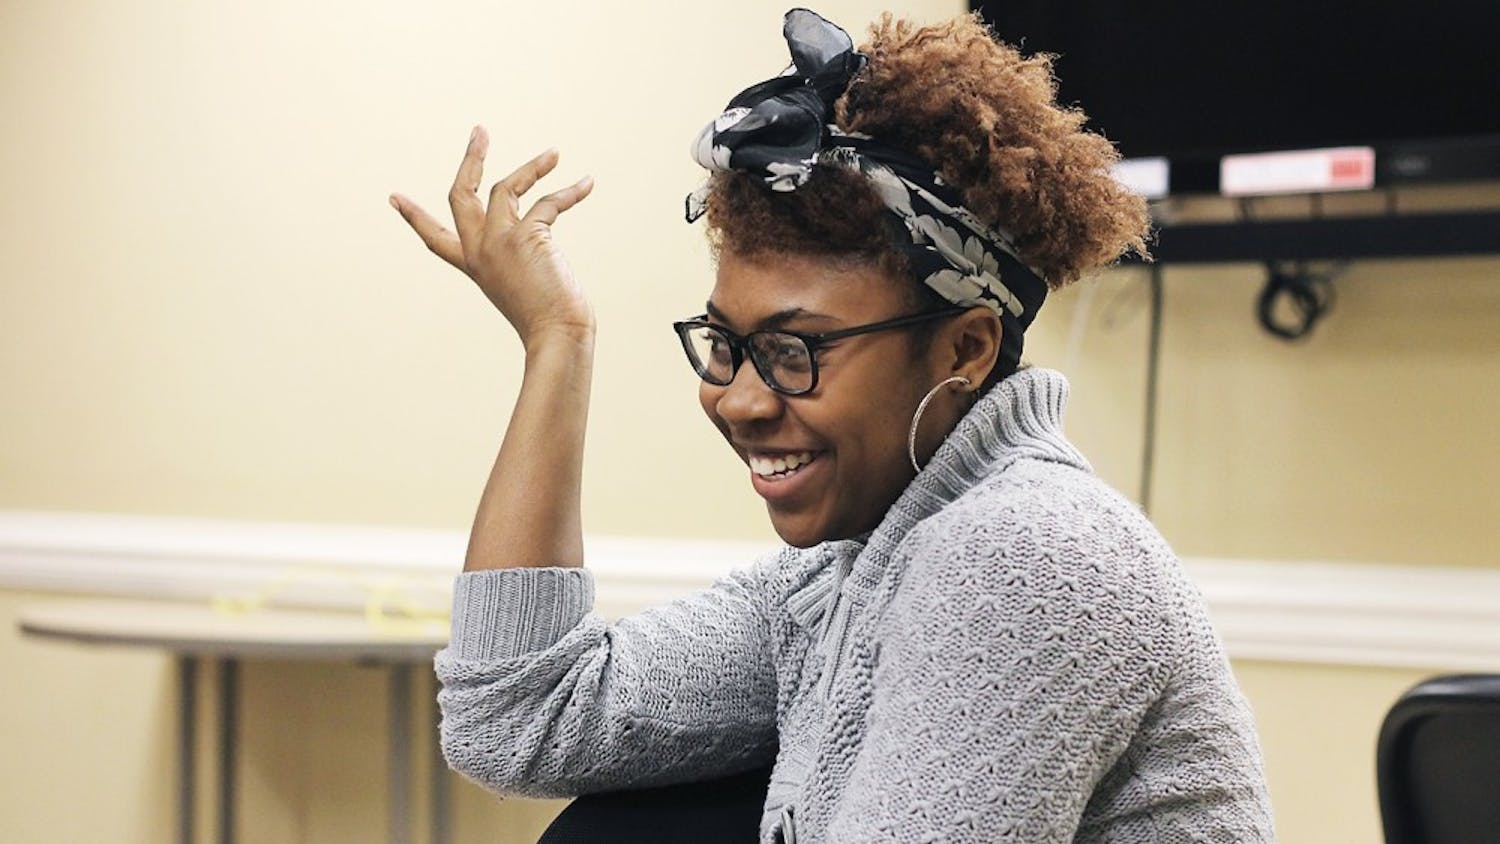 Cipryana Mack, a sophomore EXSS major, leads a discussion following a screening of the film "Dear White People" hosted by the UNC Black Student Movement at Ram Village on Friday.